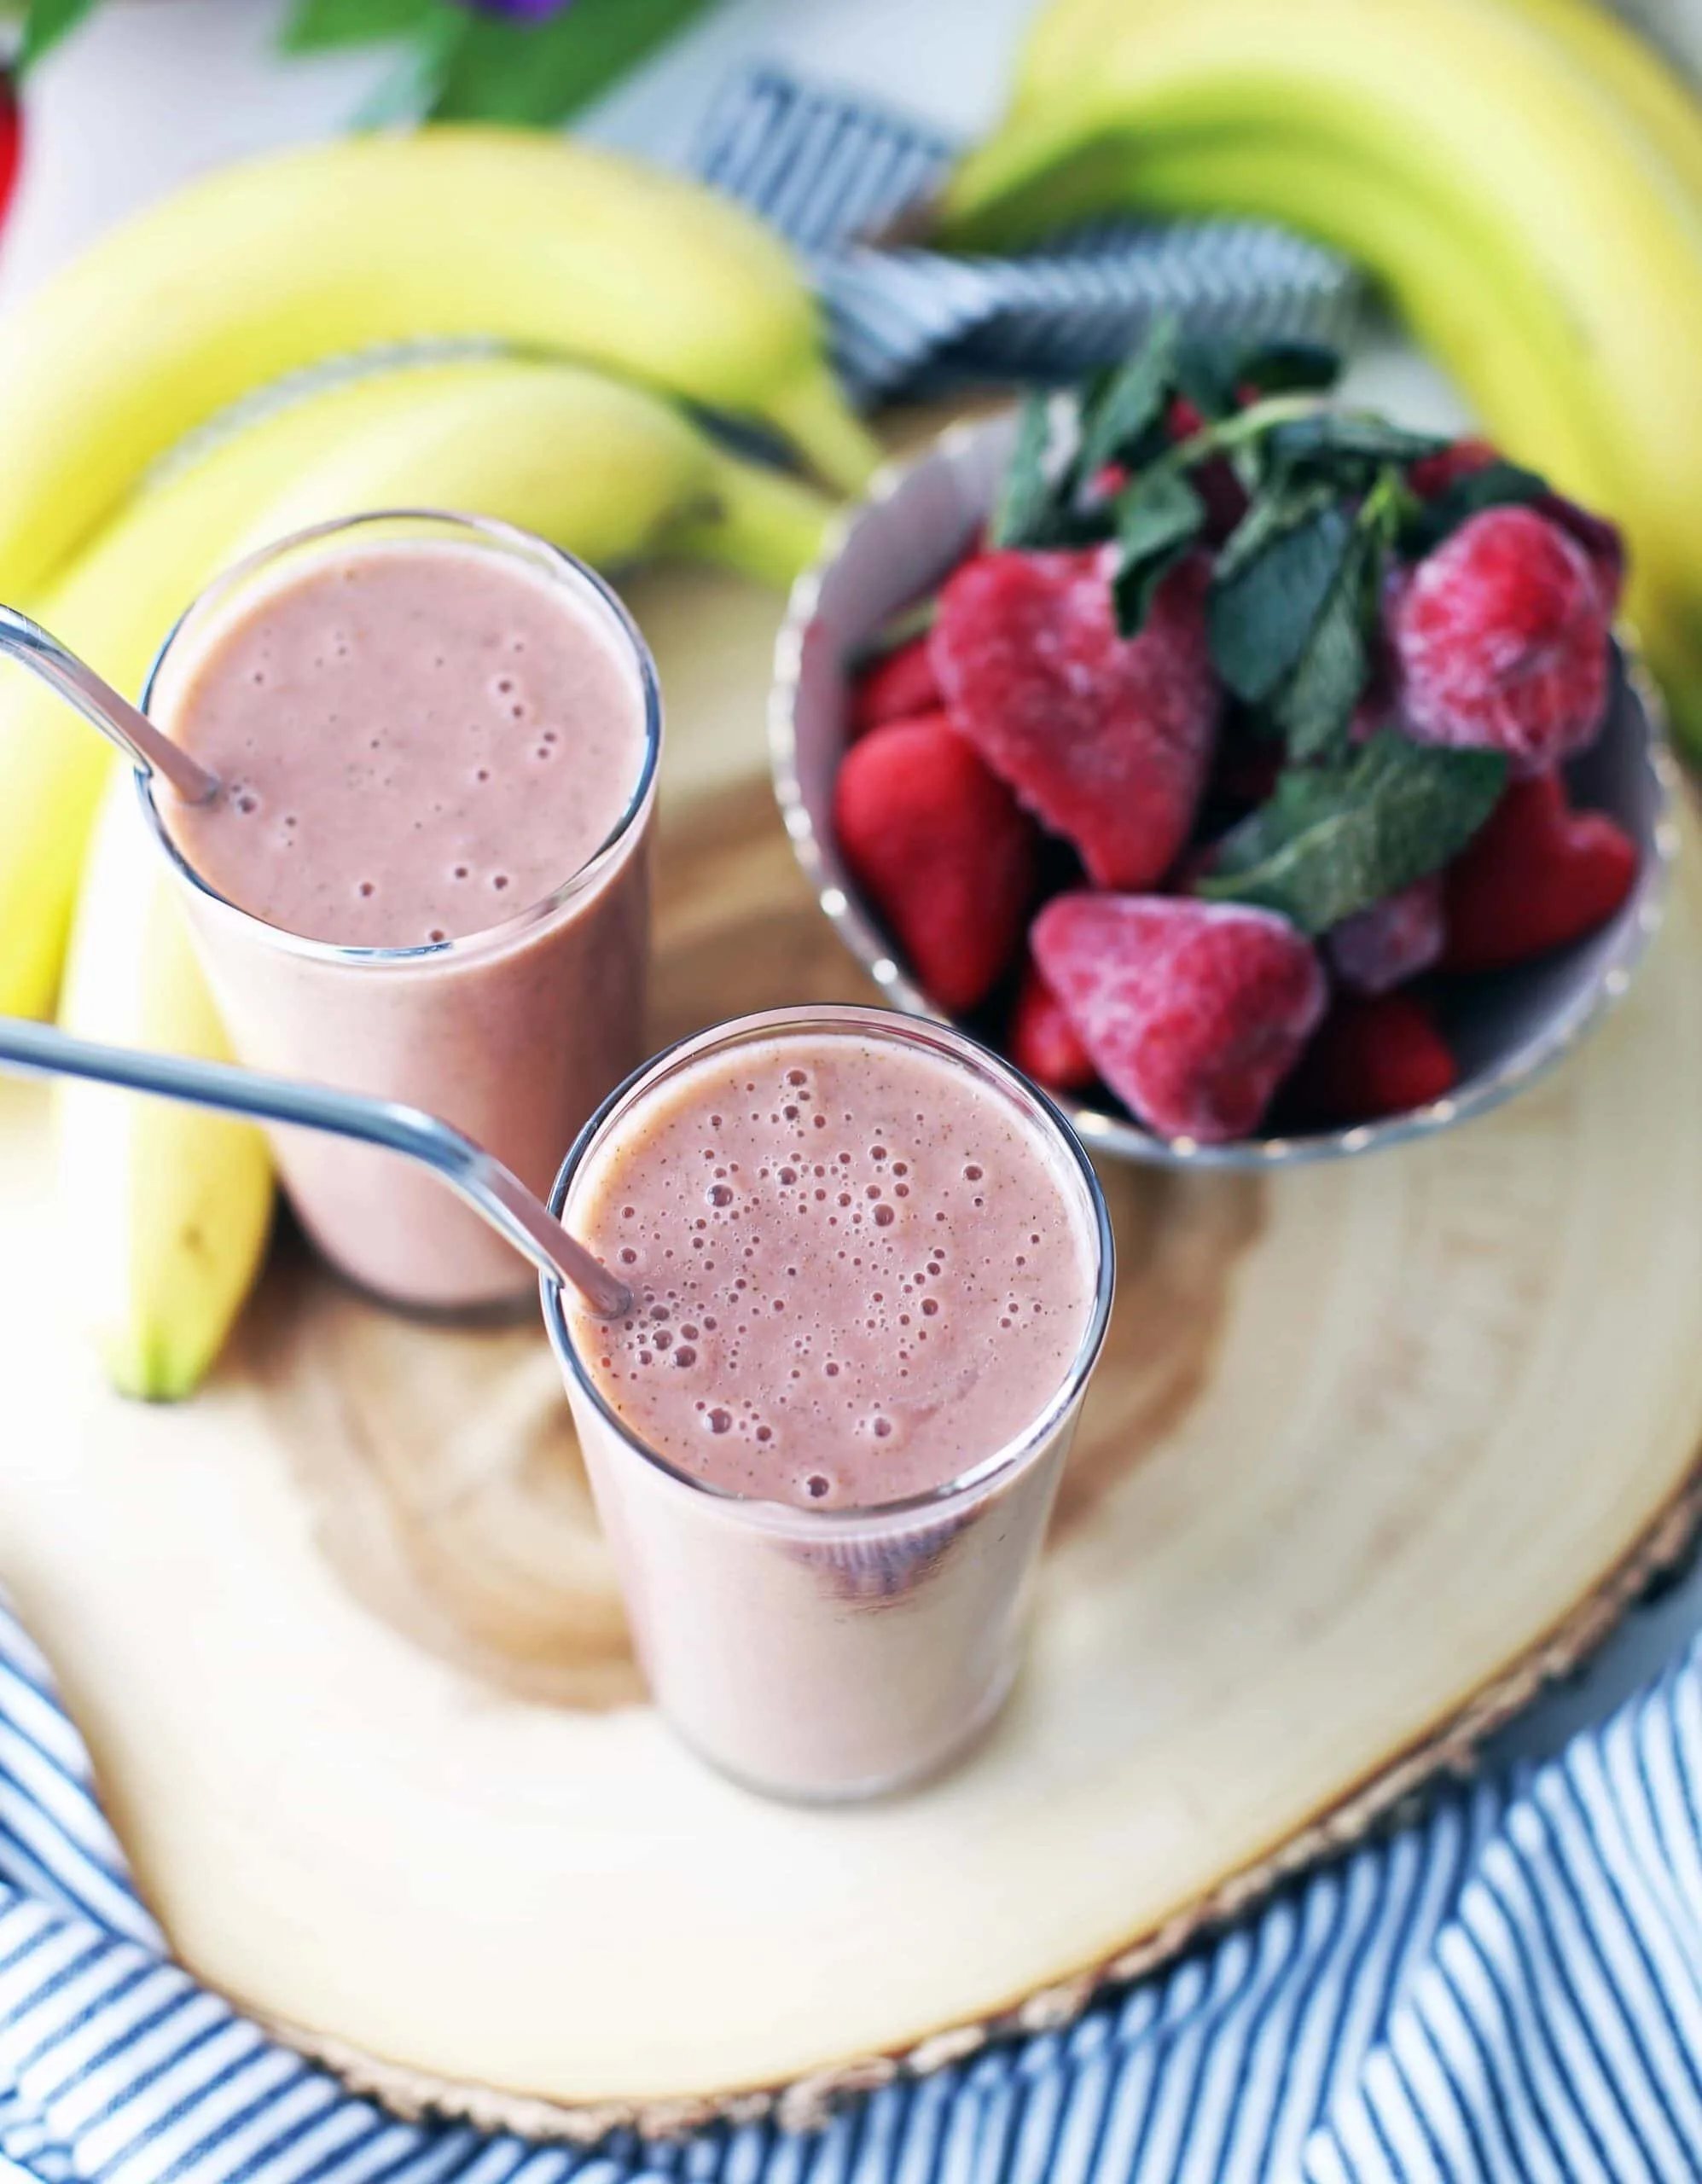 Two strawberry mint smoothies, a bowl of frozen strawberries, and bananas on a wooden platter.